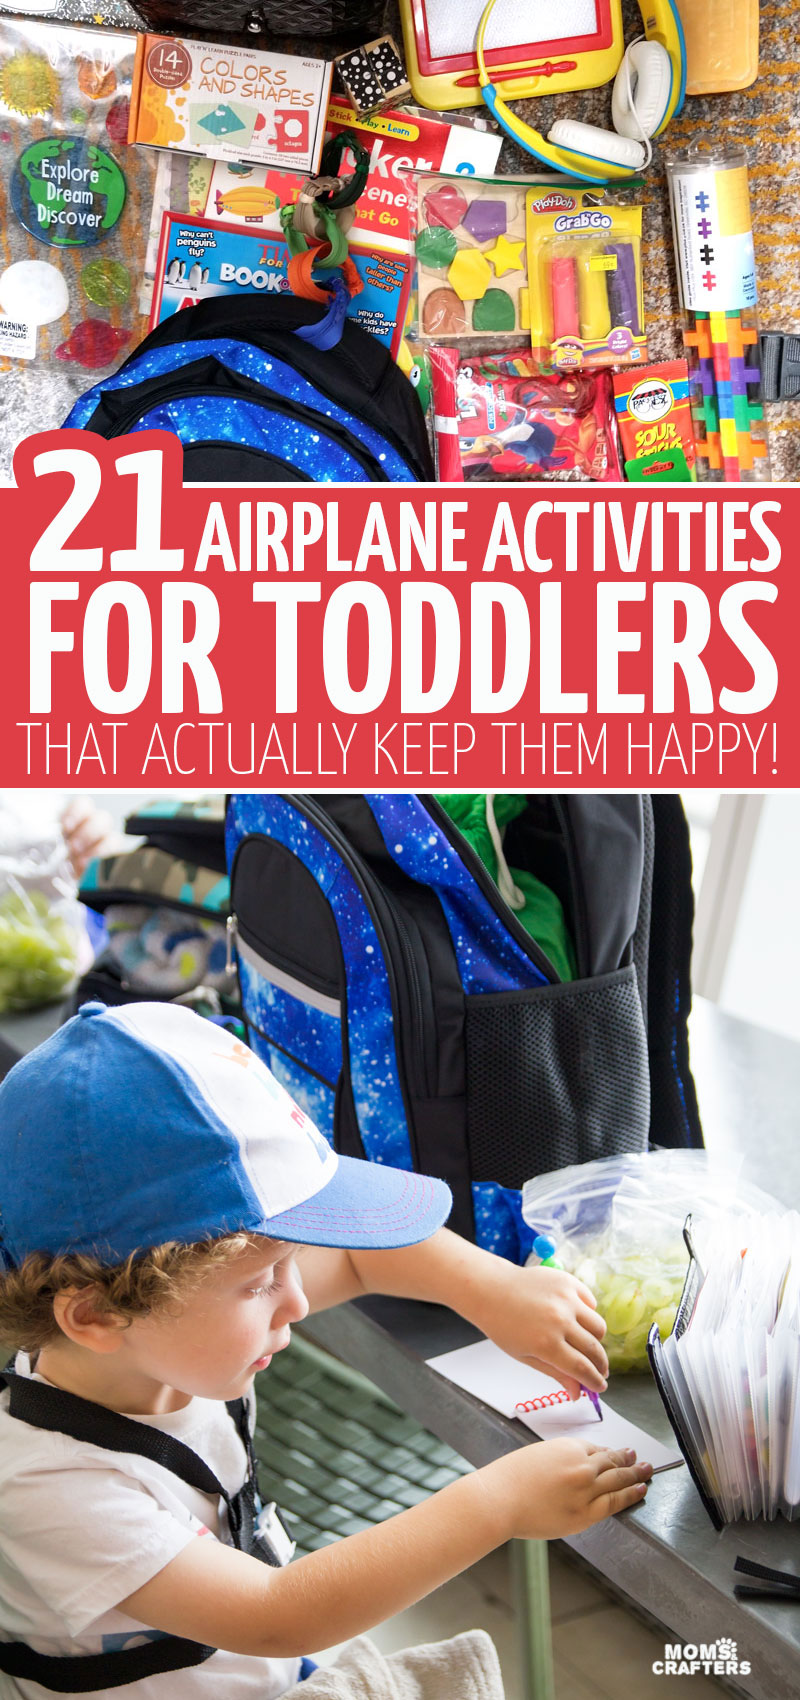 Toddler Airplane Activities - 21 Tried & True Ideas to keep them happy!